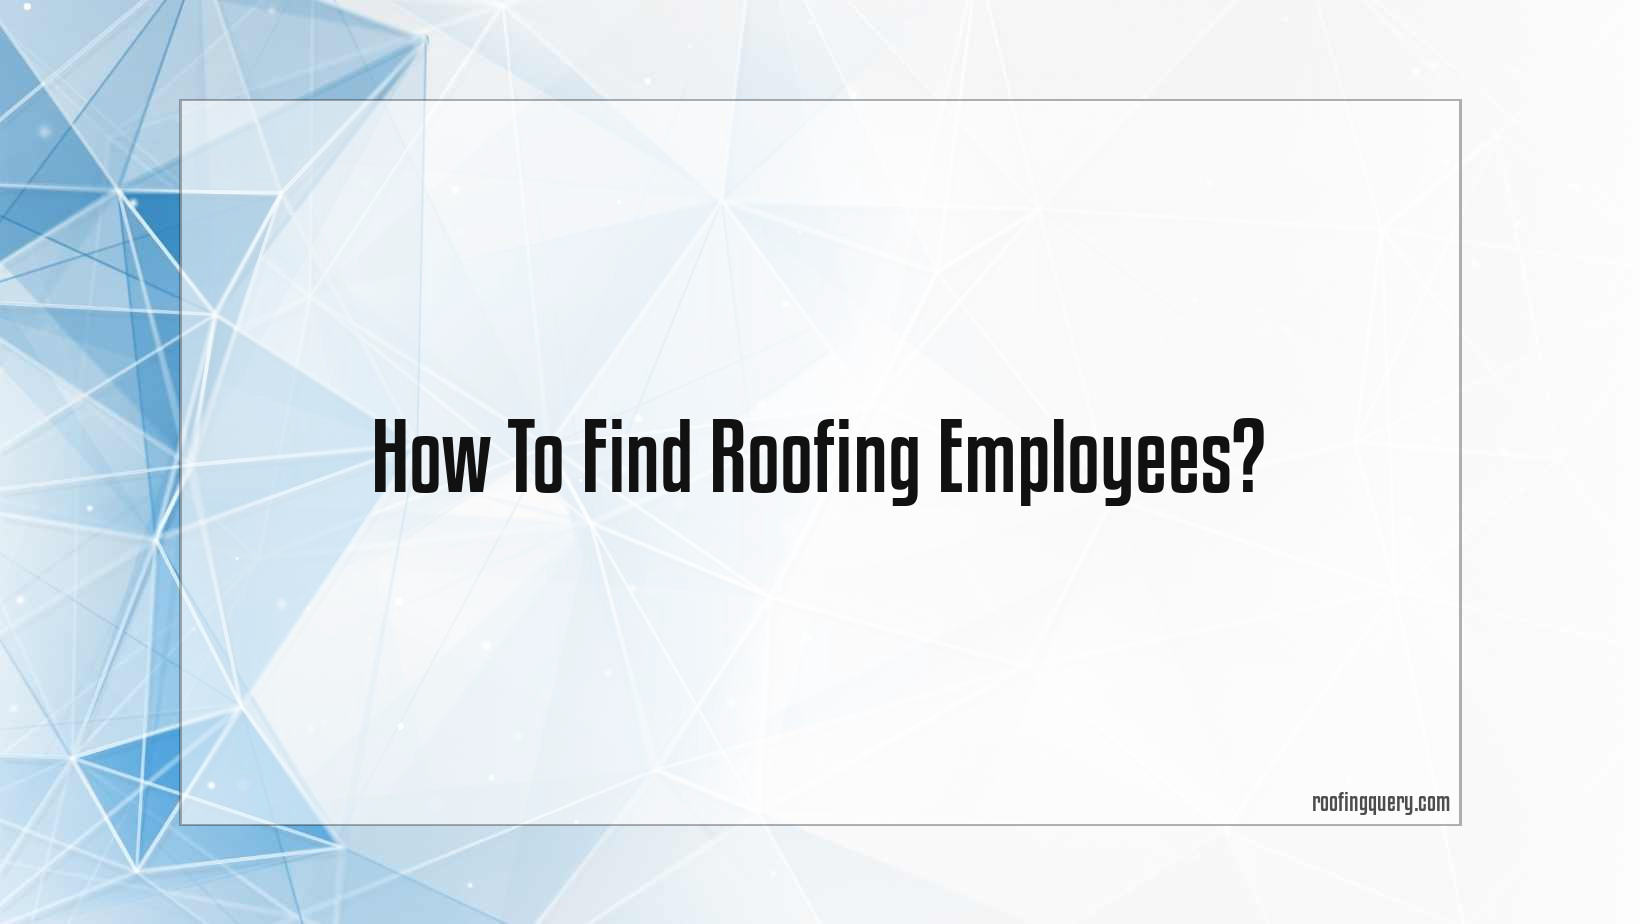 How To Find Roofing Employees?